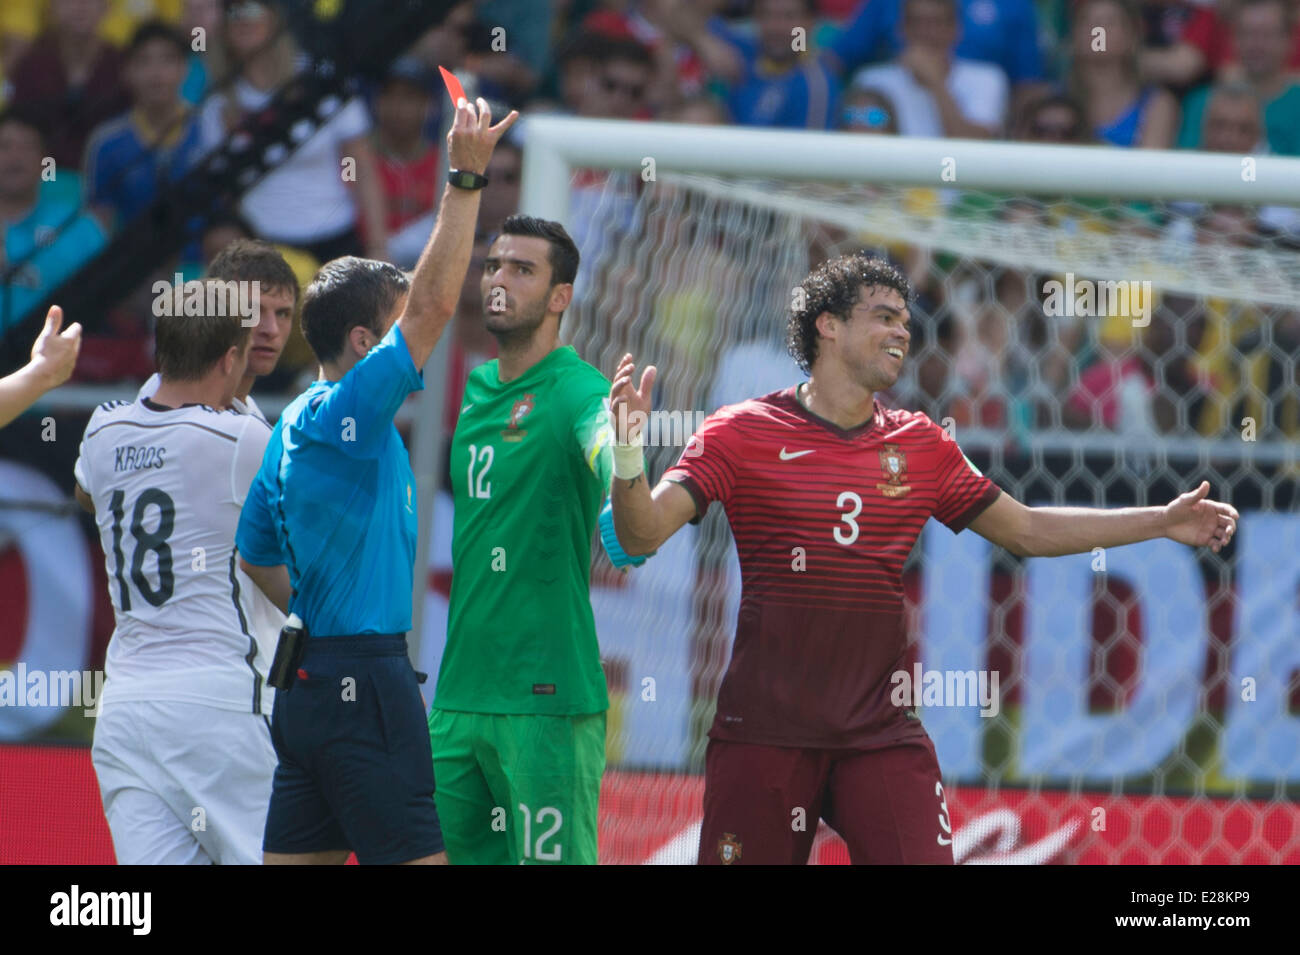 Salvador, Brazil. 16th June, 2014. Milorad Mazic (Referee), Pepe (GER) Football/Soccer : Pepe of Portgual is shown a red card for a headbutt on Thomas Muller of Germany during the FIFA World Cup Brazil 2014 Group G match between Germany 4-0 Portugal at Arena Fonte Nova in Salvador, Brazil . Credit:  Maurizio Borsari/AFLO/Alamy Live News Stock Photo